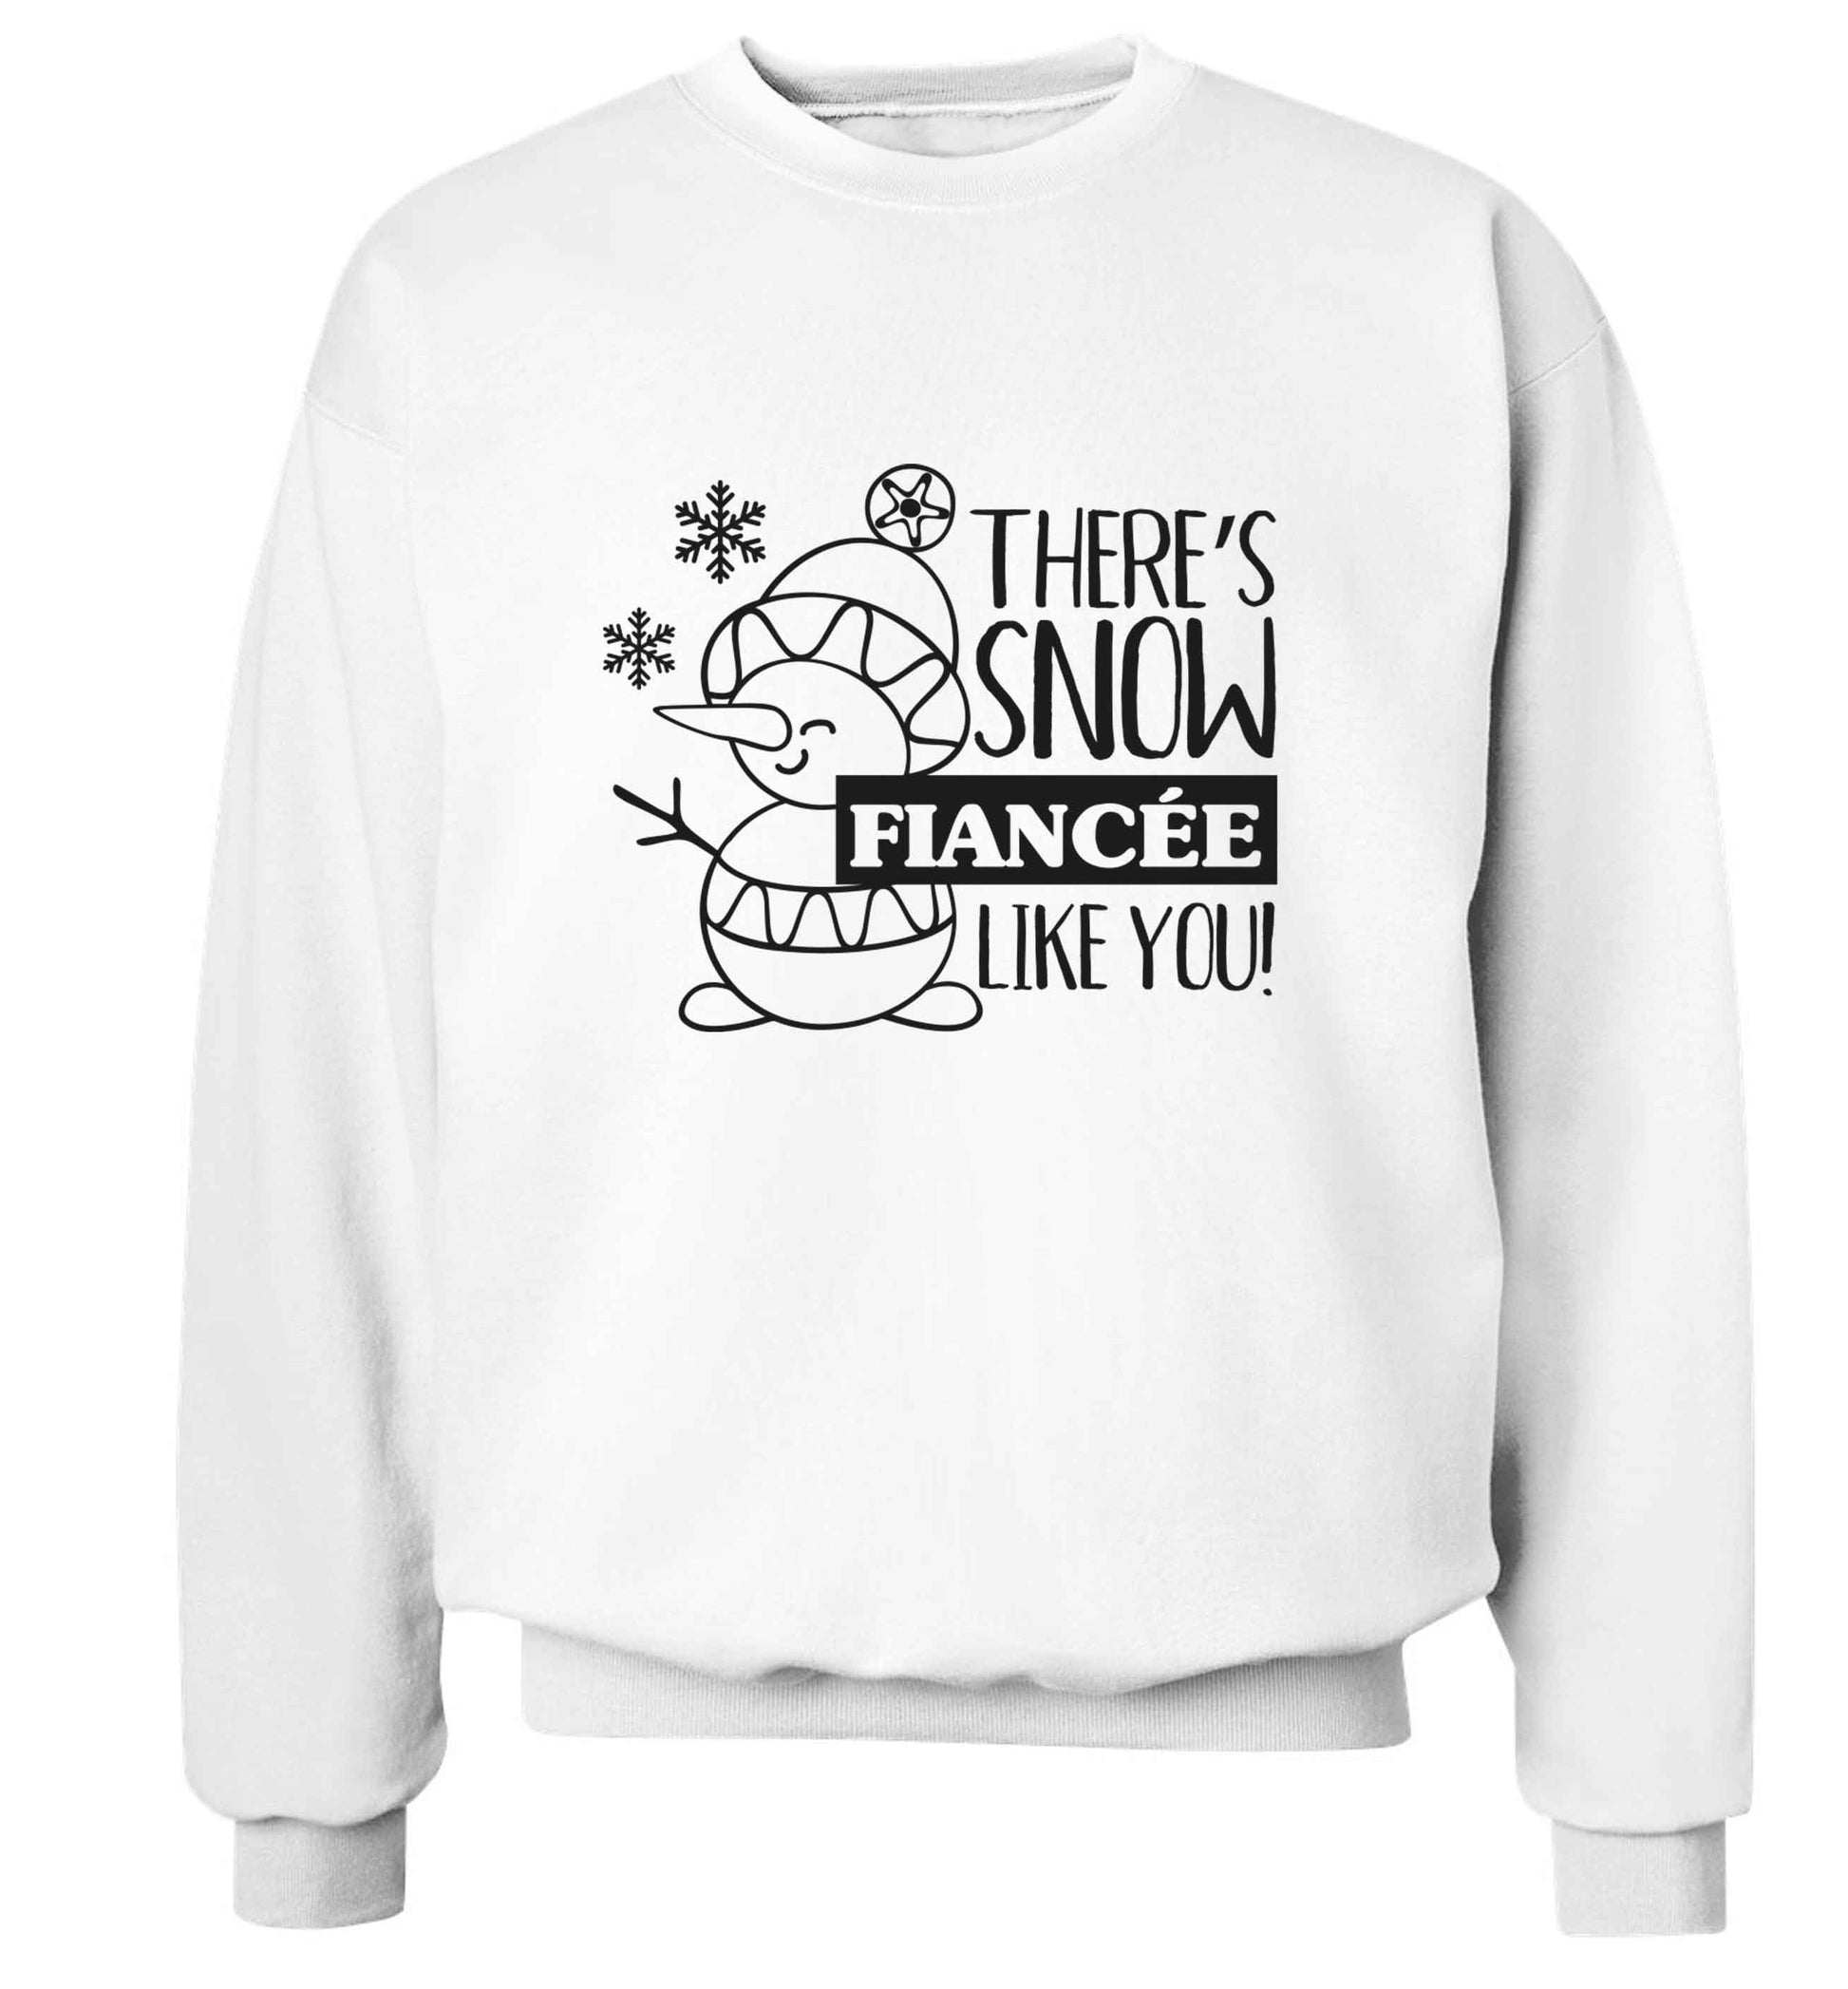 There's snow fiancee like you adult's unisex white sweater 2XL